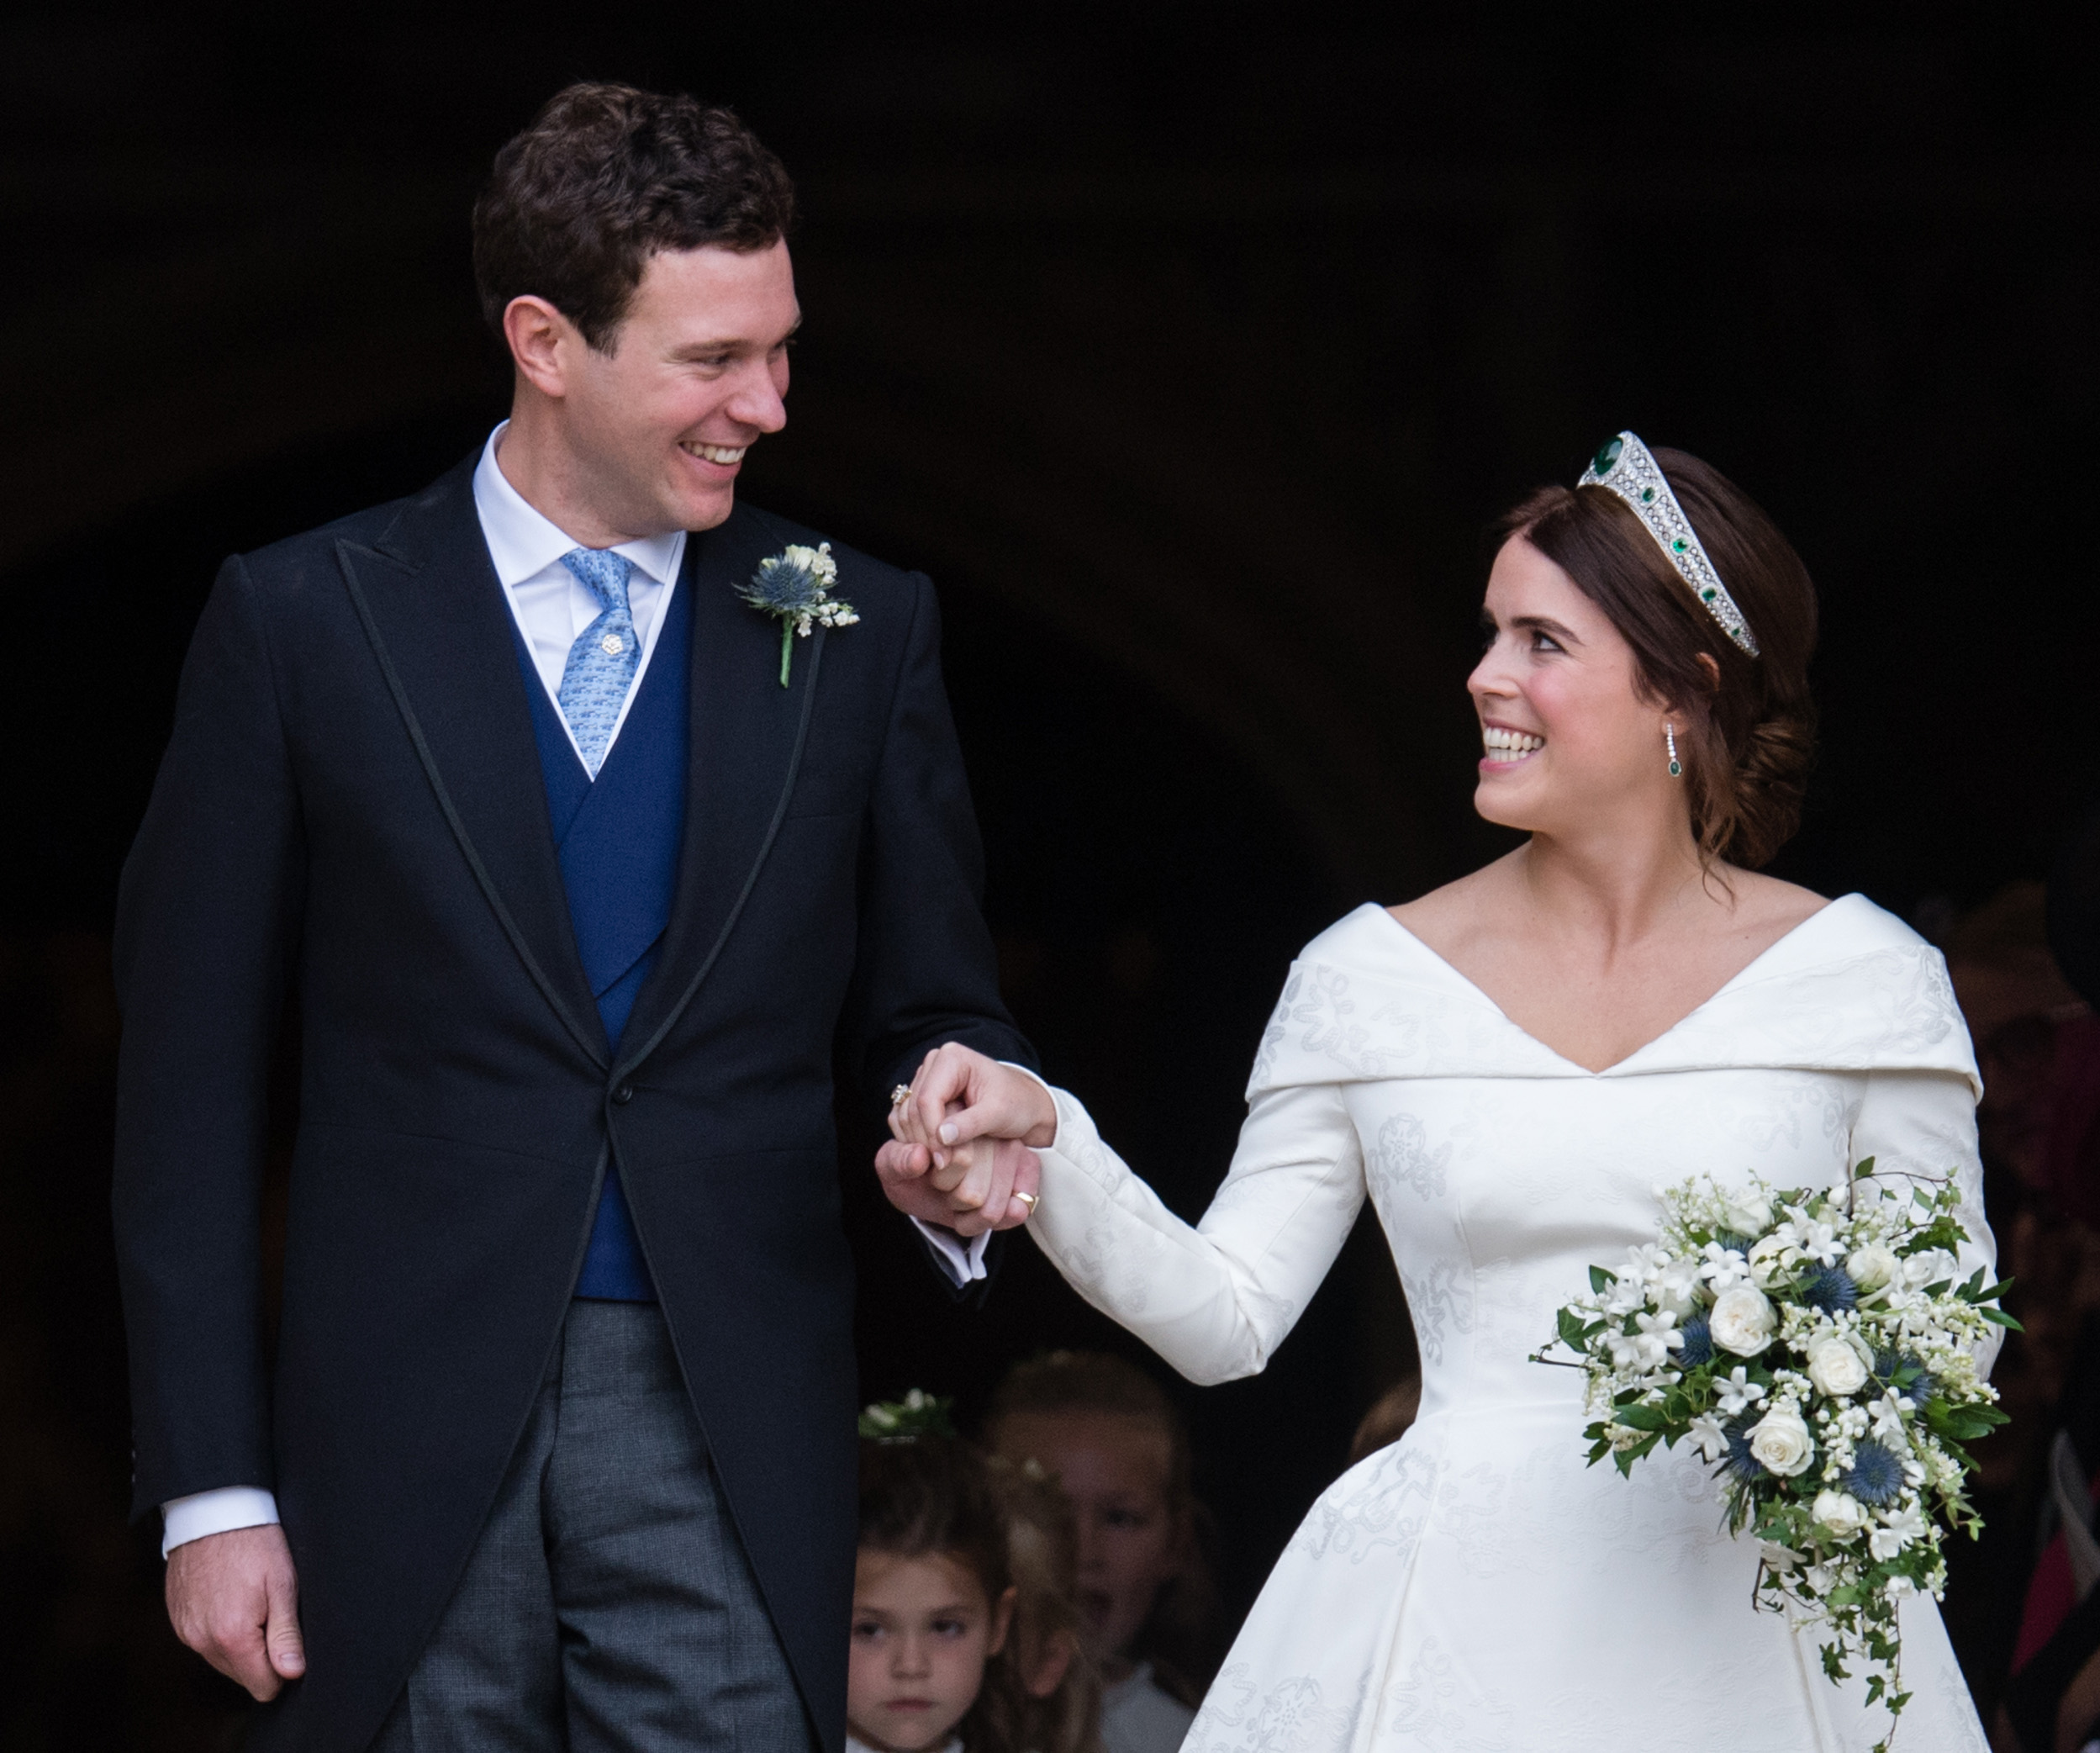 The beautiful sentiment behind Princess Eugenie’s wedding goody bags